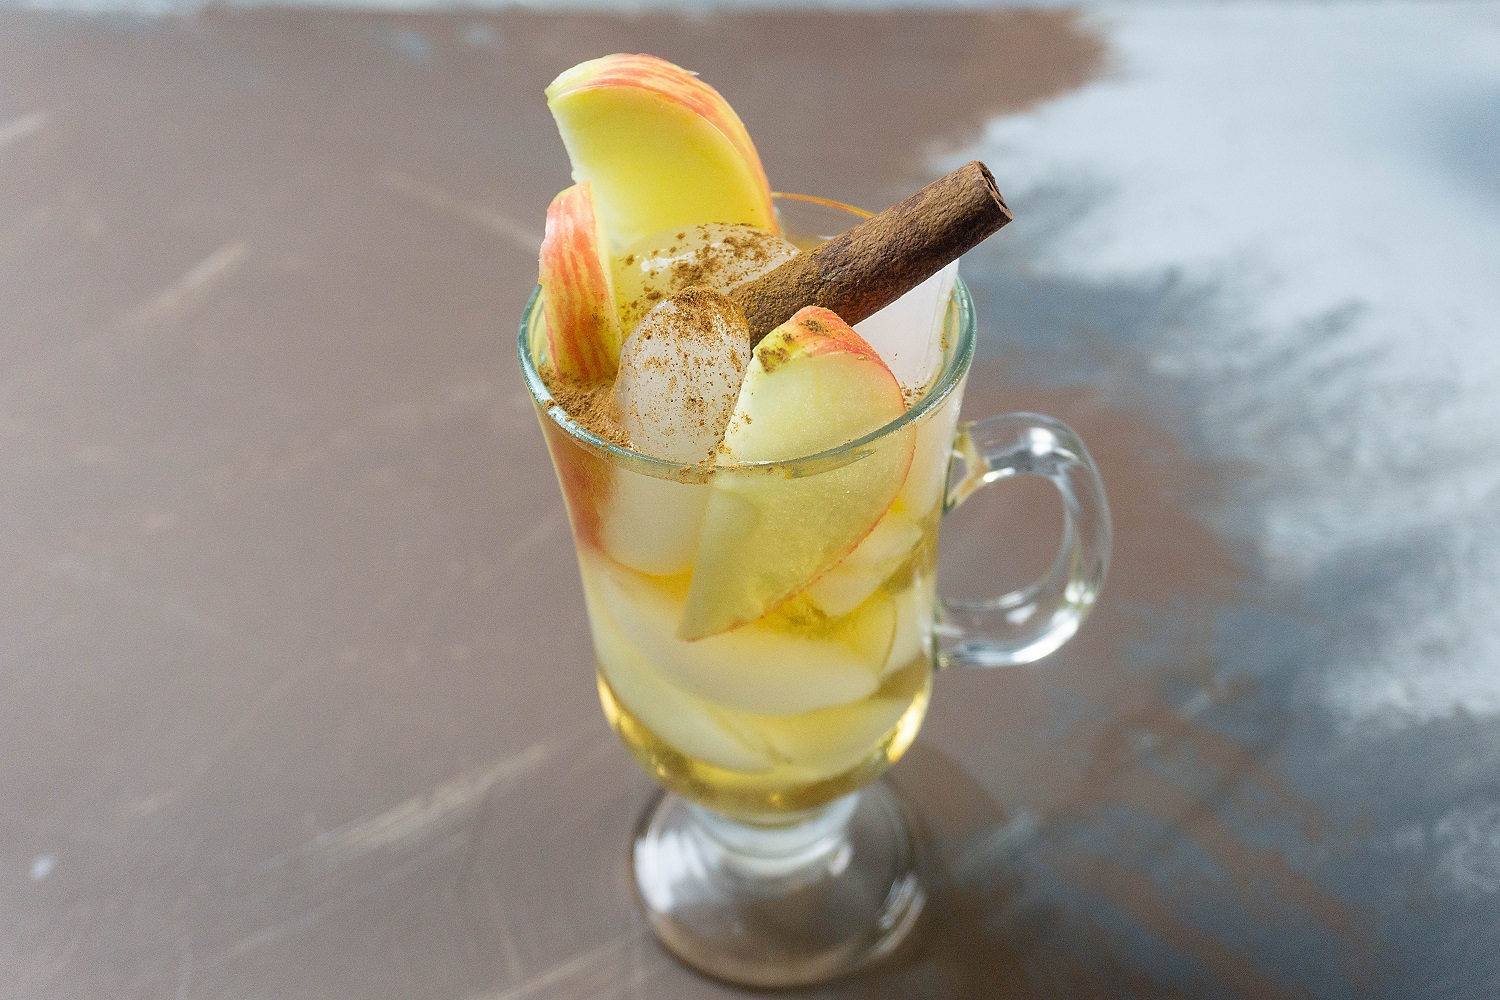 Caramel apple cocktail with apple slices and cinnamon in a glass.